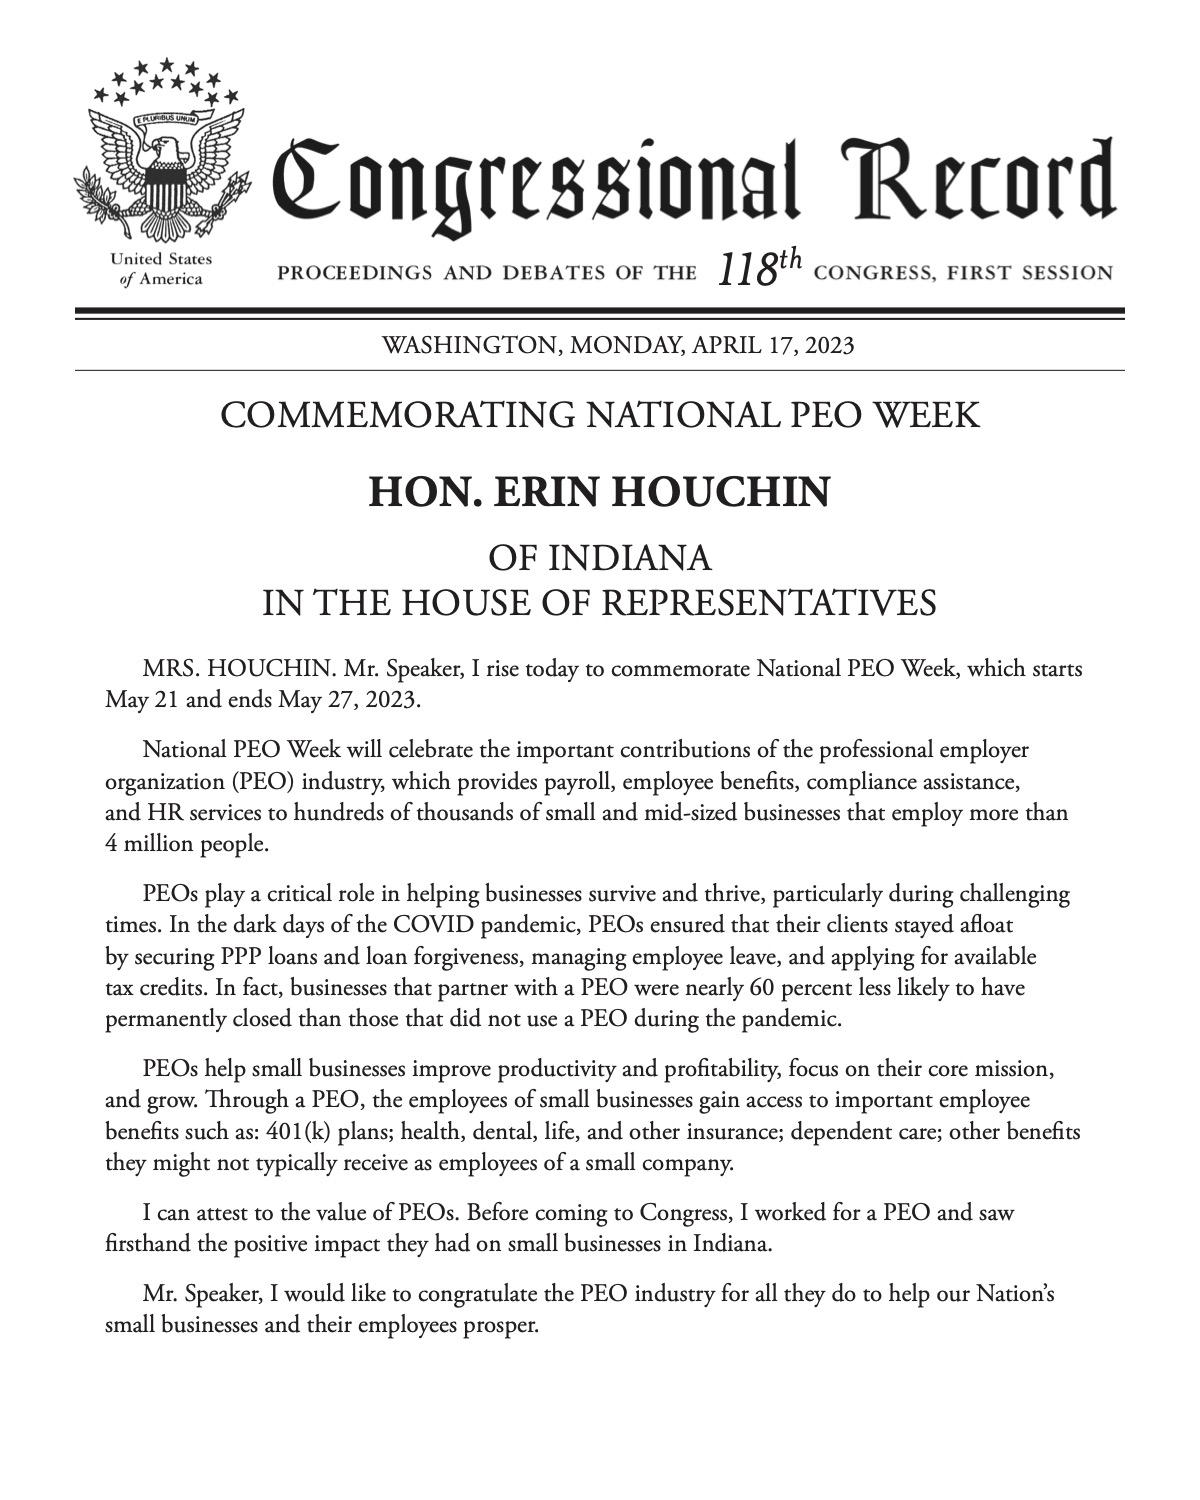 Image linking to PDF of a Congressional Proclamation that commemorates National PEO Week and highlights the contributions of the PEO industry